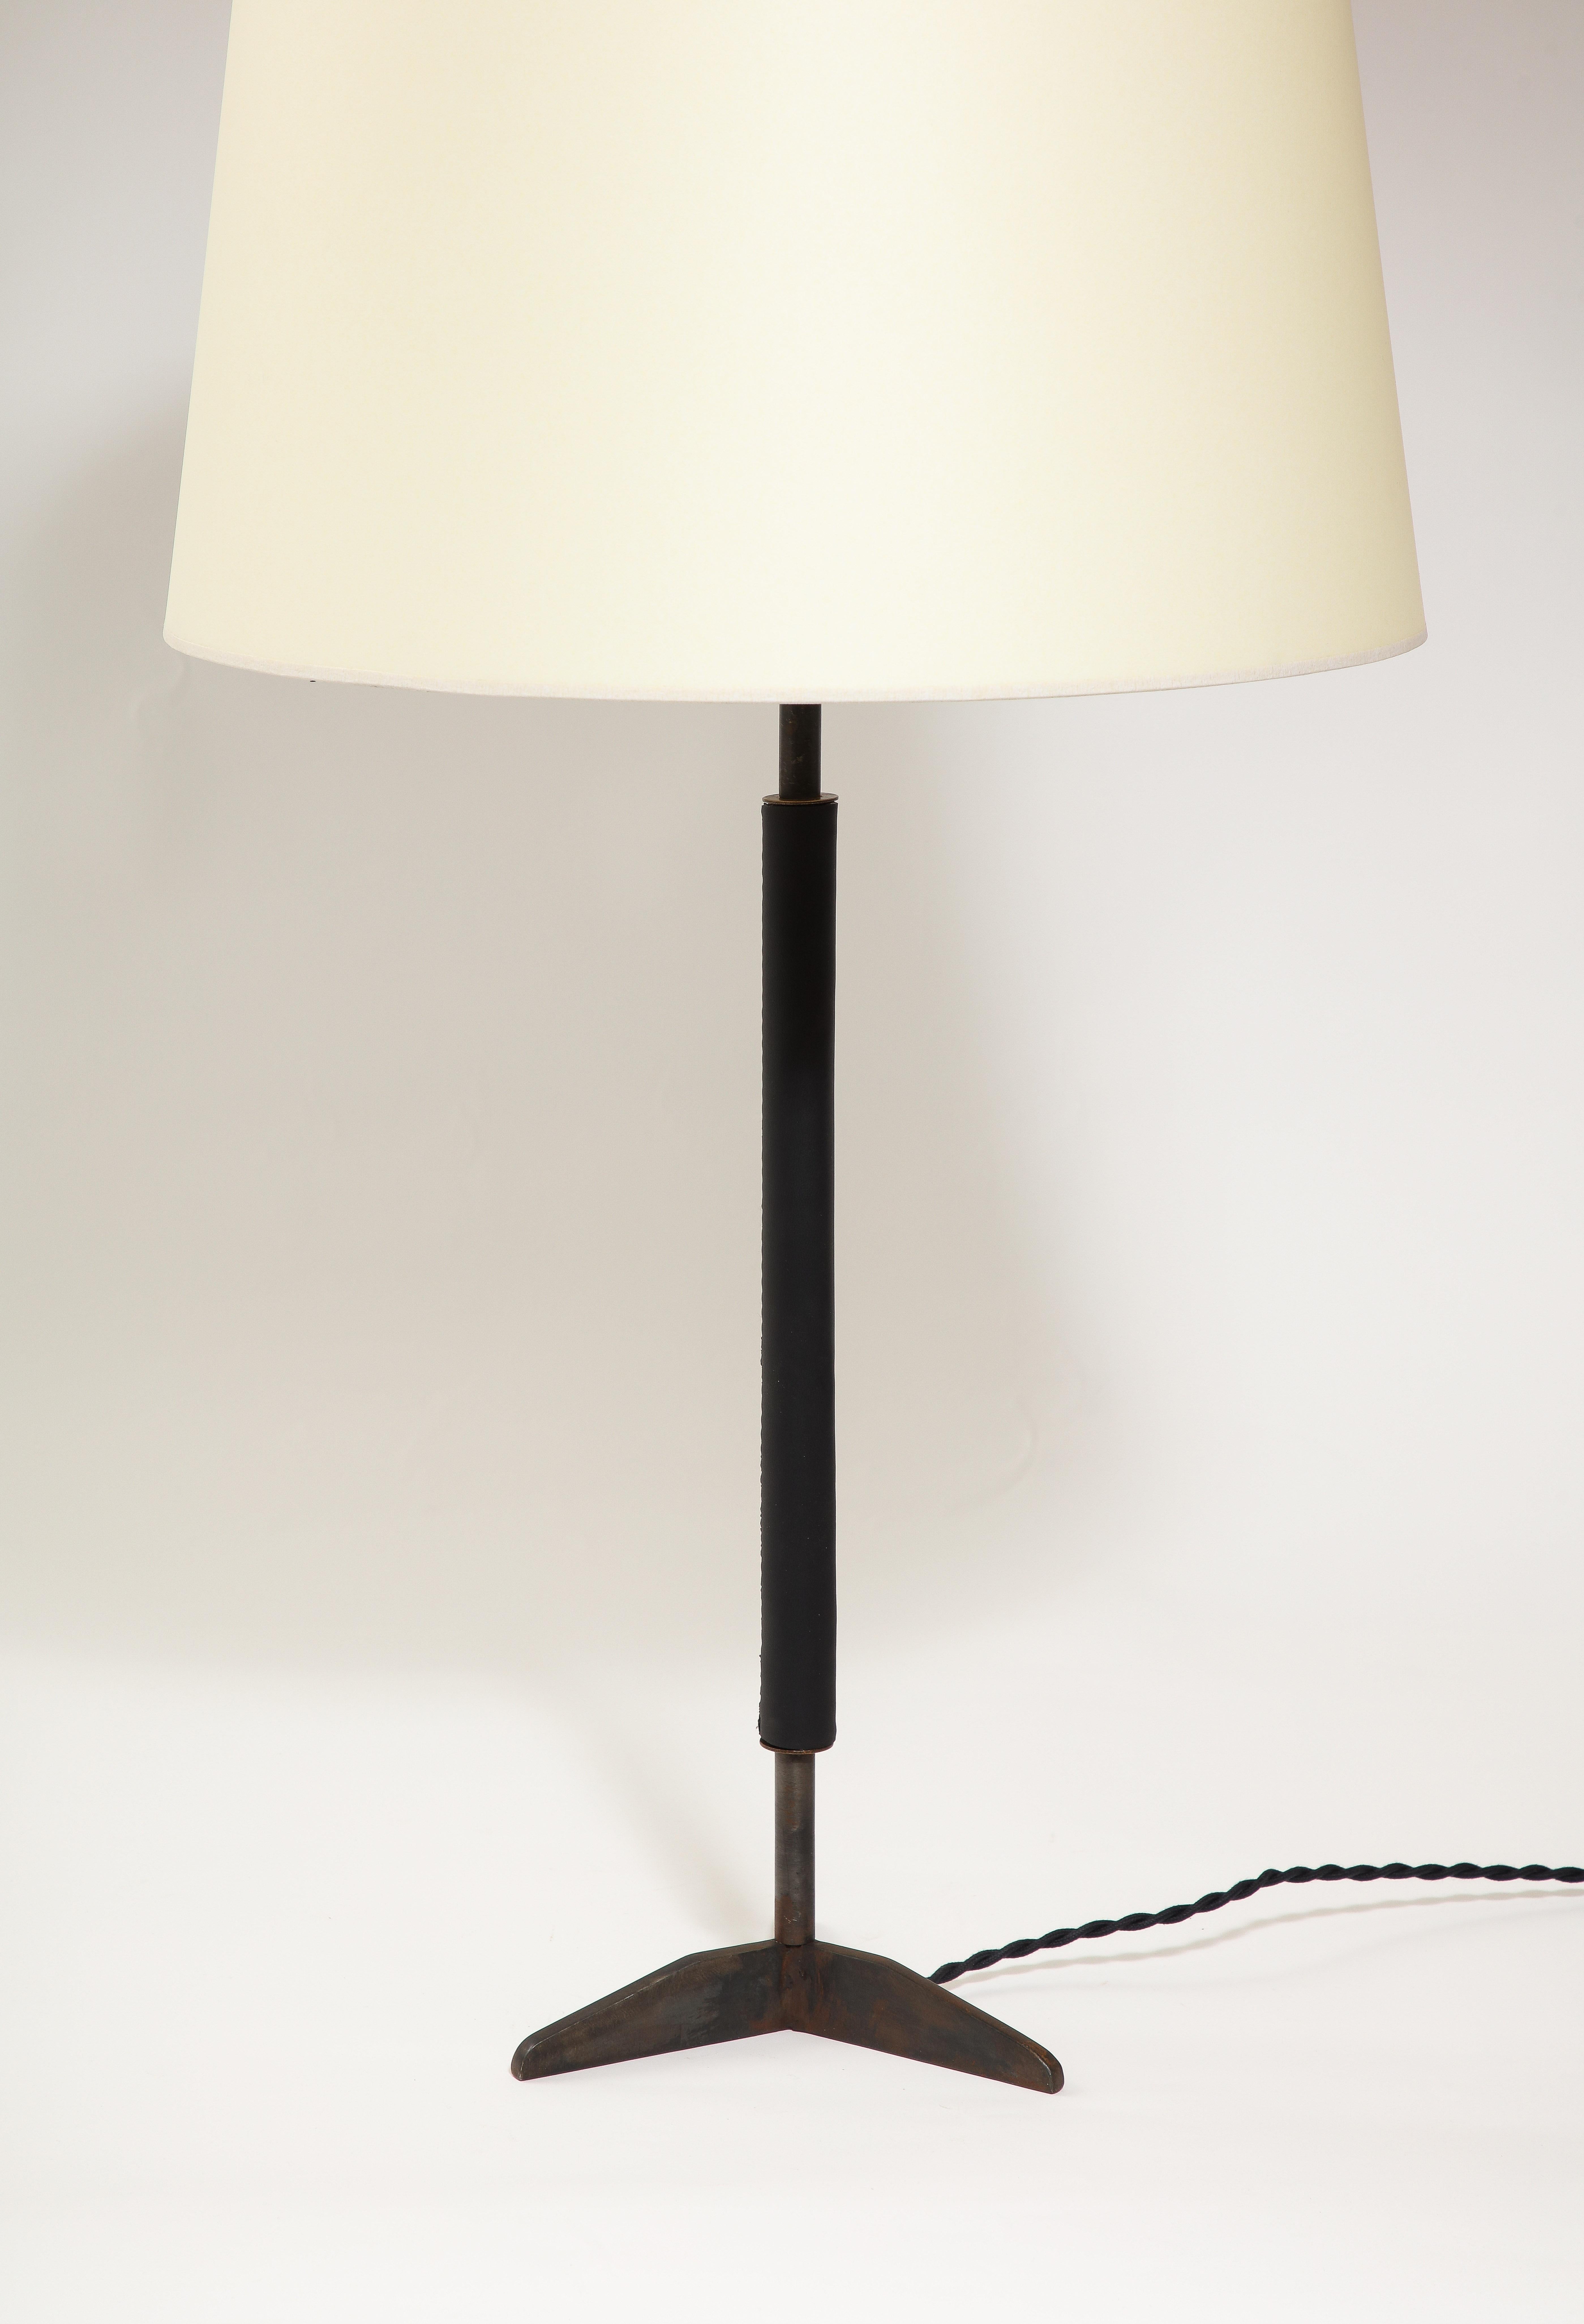 Blackened Steel & Leather Table Lamp, France 1950 For Sale 6